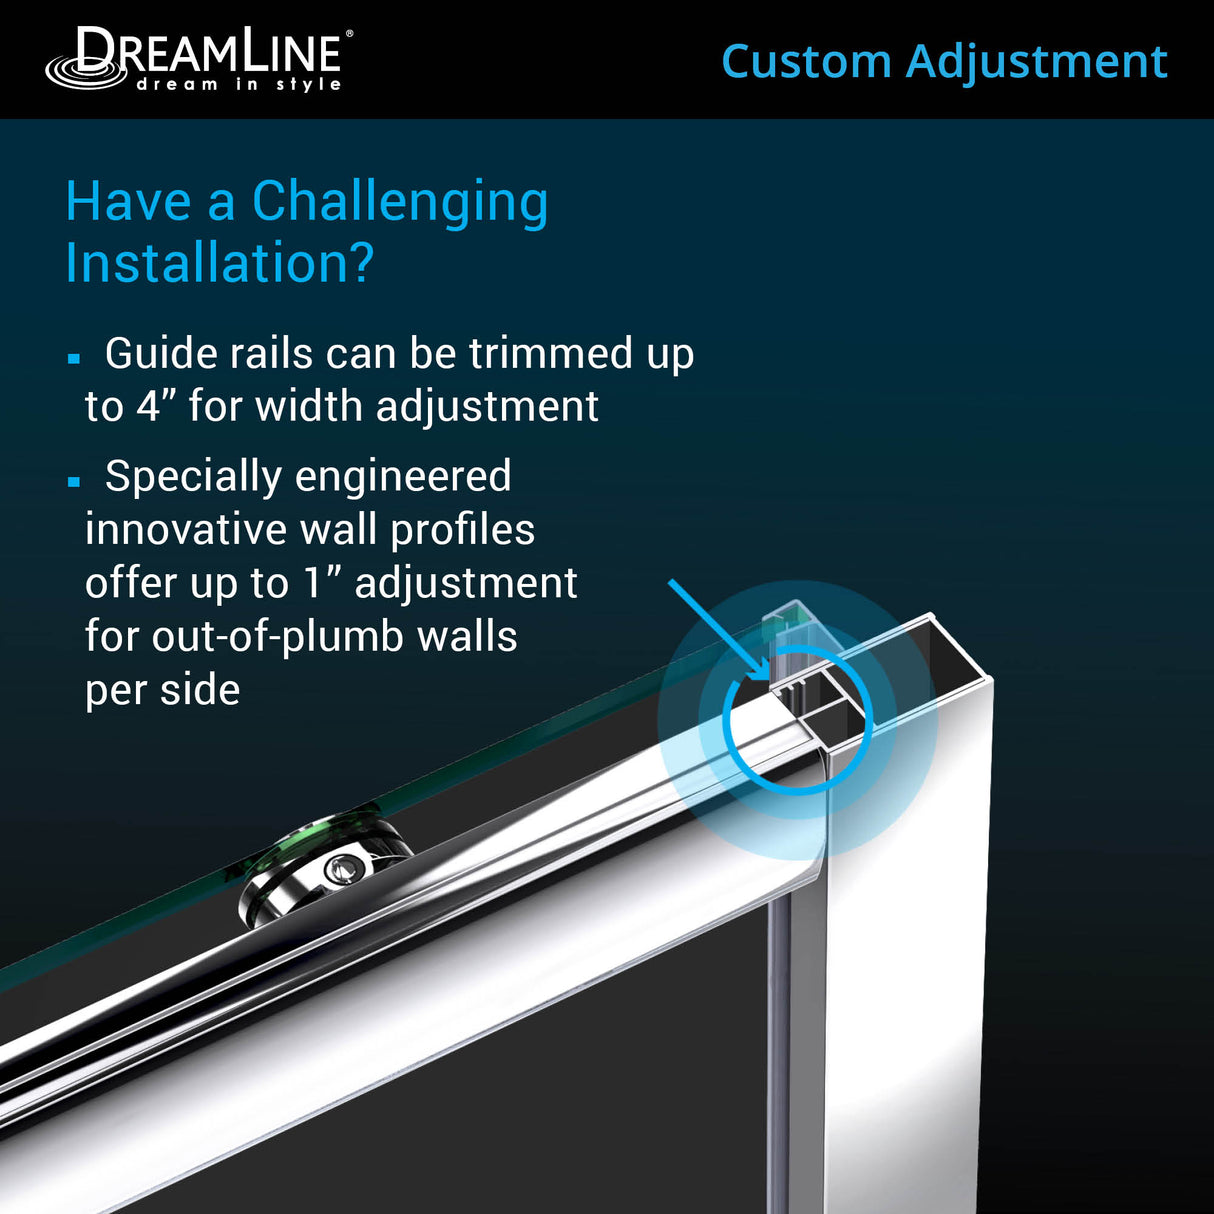 DreamLine Infinity-Z 36 in. D x 60 in. W x 74 3/4 in. H Frosted Sliding Shower Door in Chrome and Right Drain Black Base